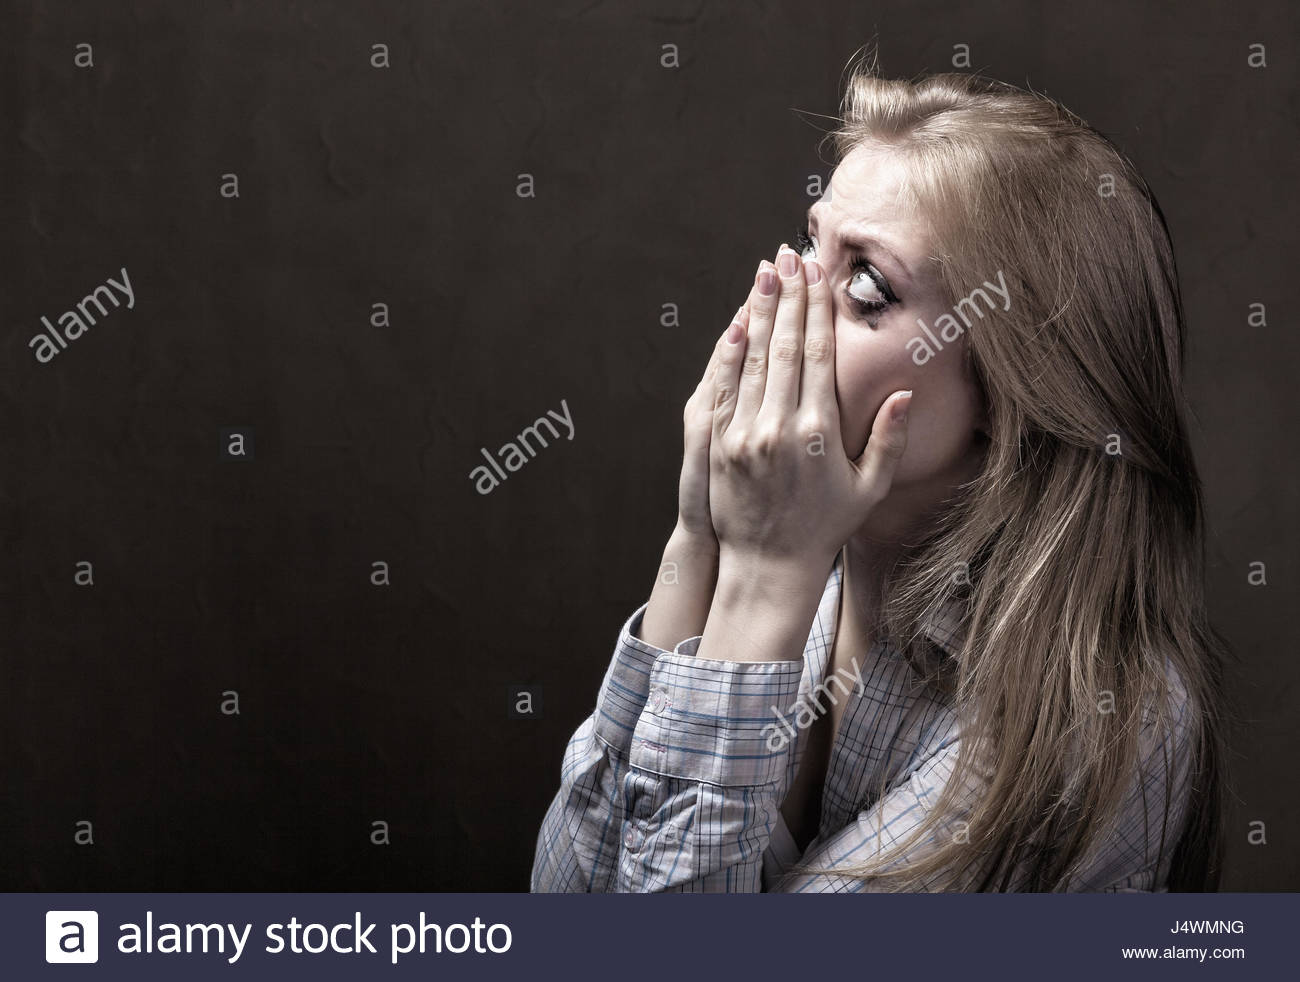 Young Woman Desperately Crying On A Dark Background Stock Photo